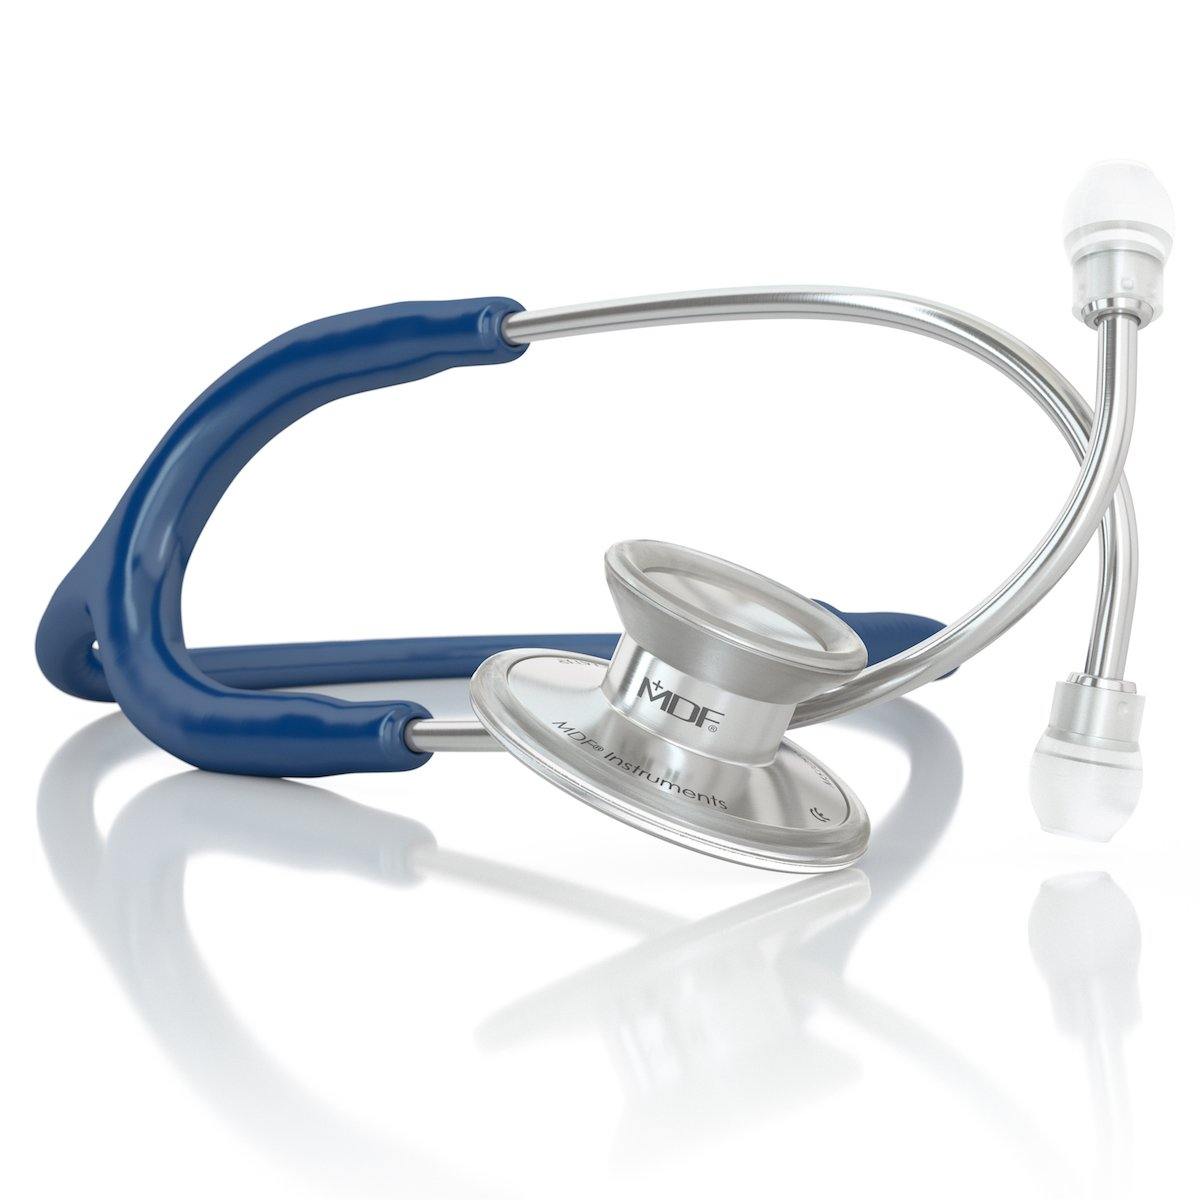 Acoustica® Adult Aluminum Silver Navy Blue Stethoscope - MDF747XP03